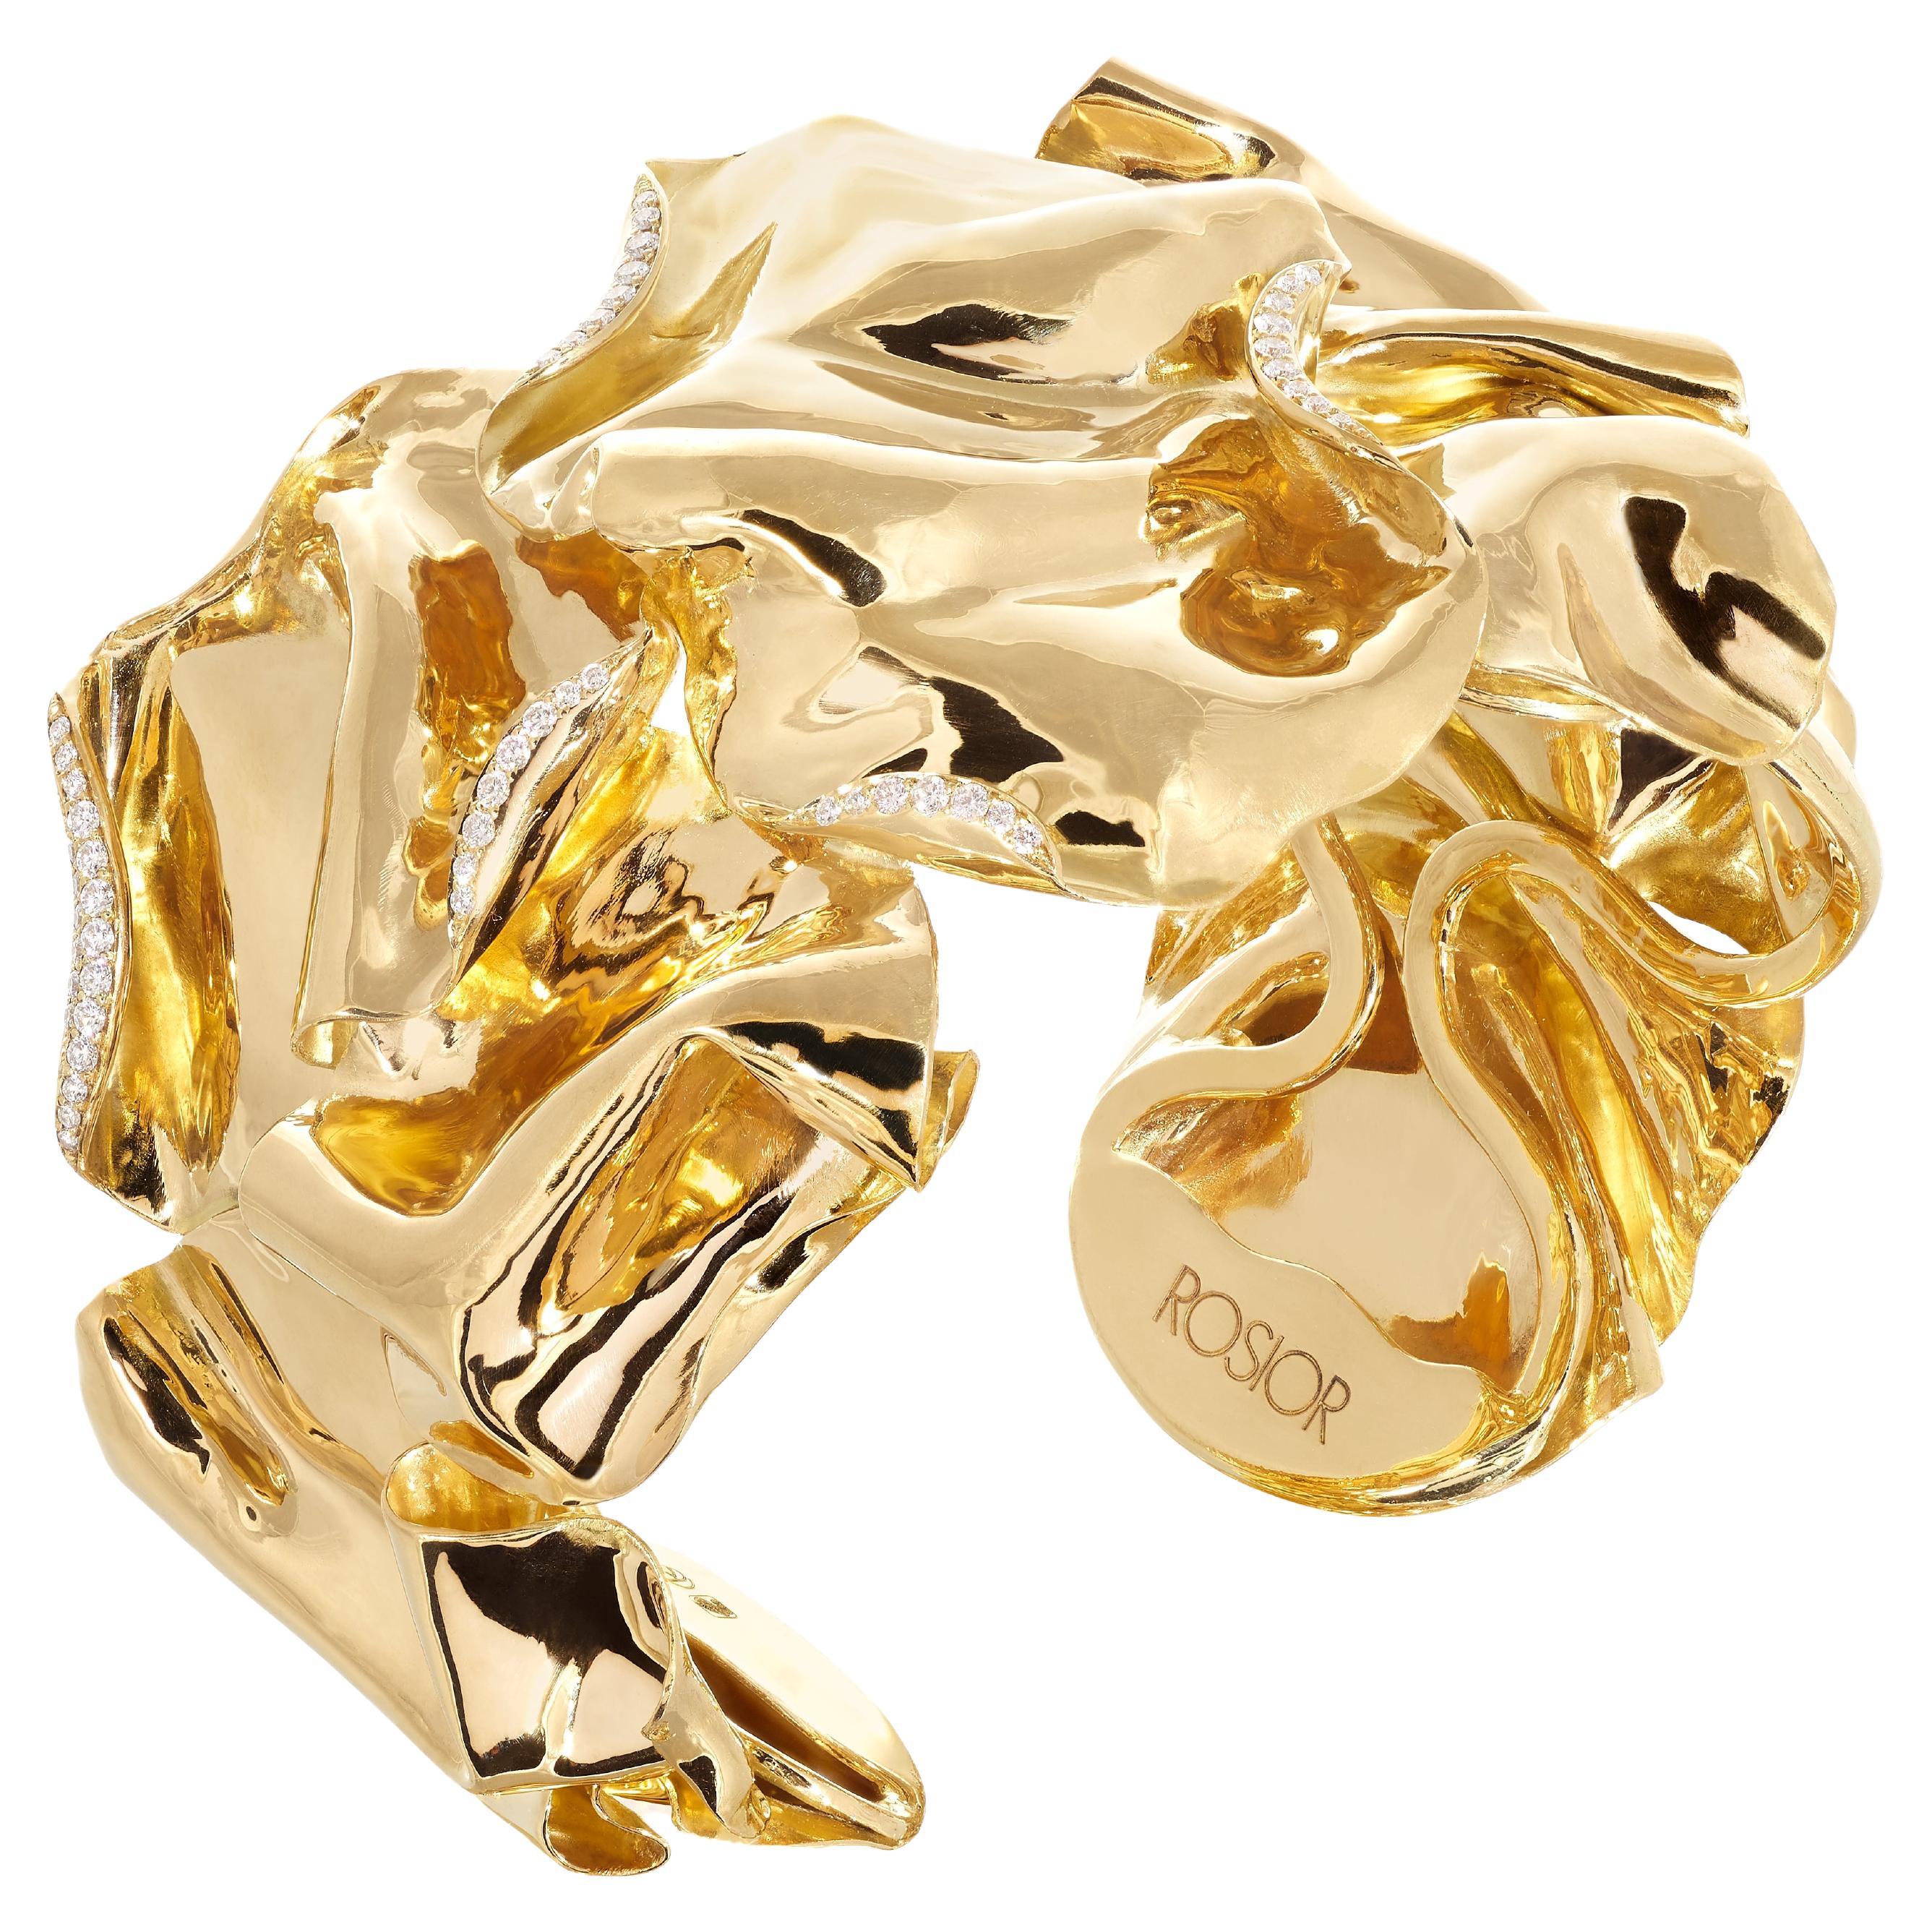 Rosior Contemporary "Crumpled" Yellow Gold Cuff Bracelet Set with Diamonds